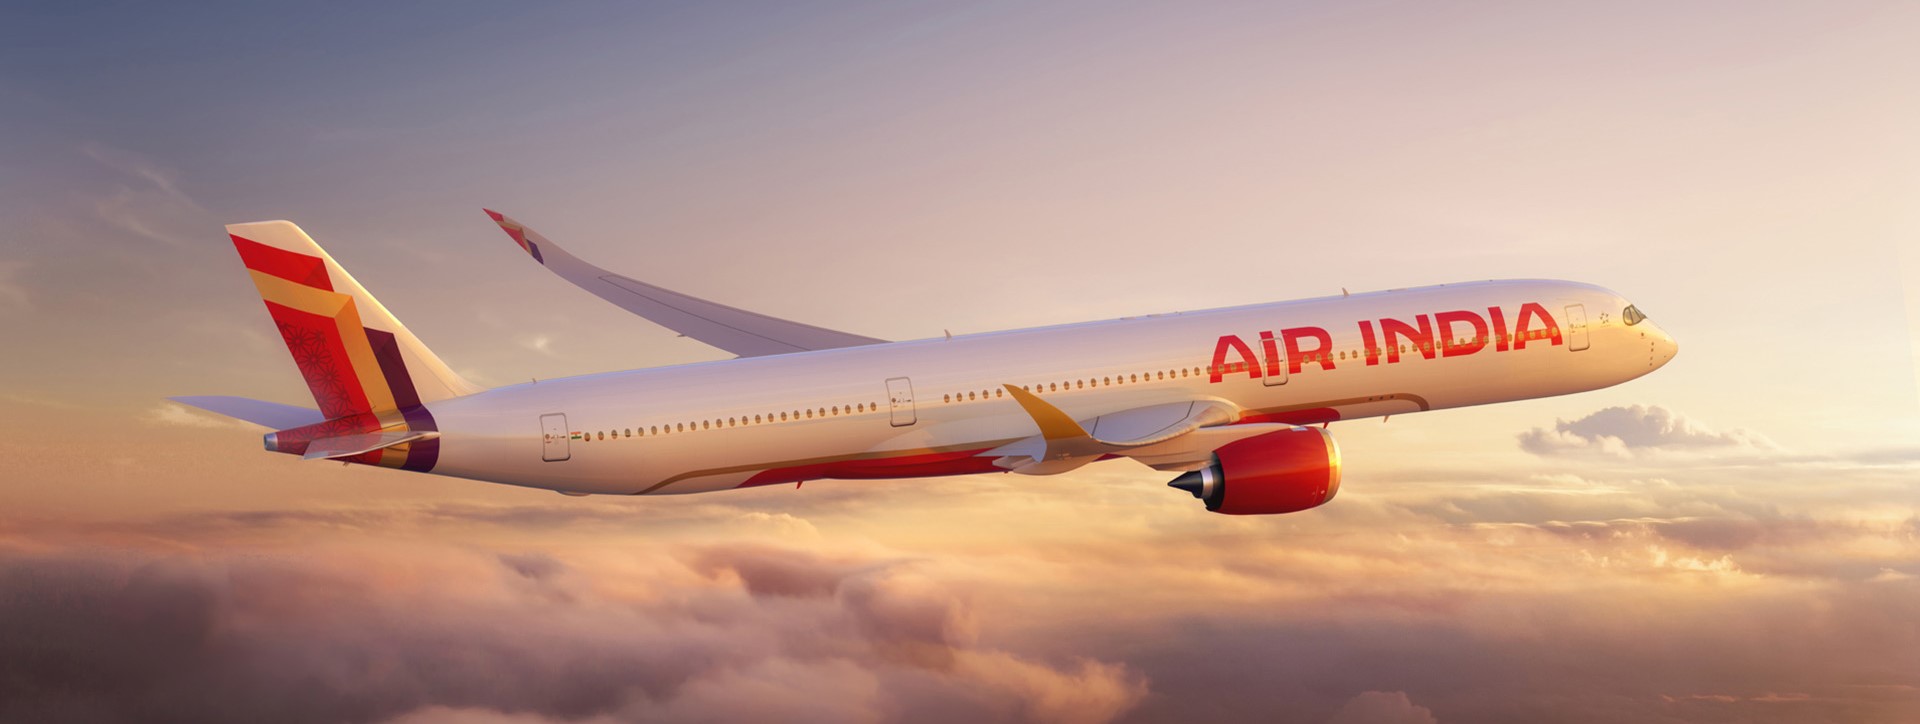 Air India will commence flights to Kuala Lumpur, Malaysia, starting September 15th.